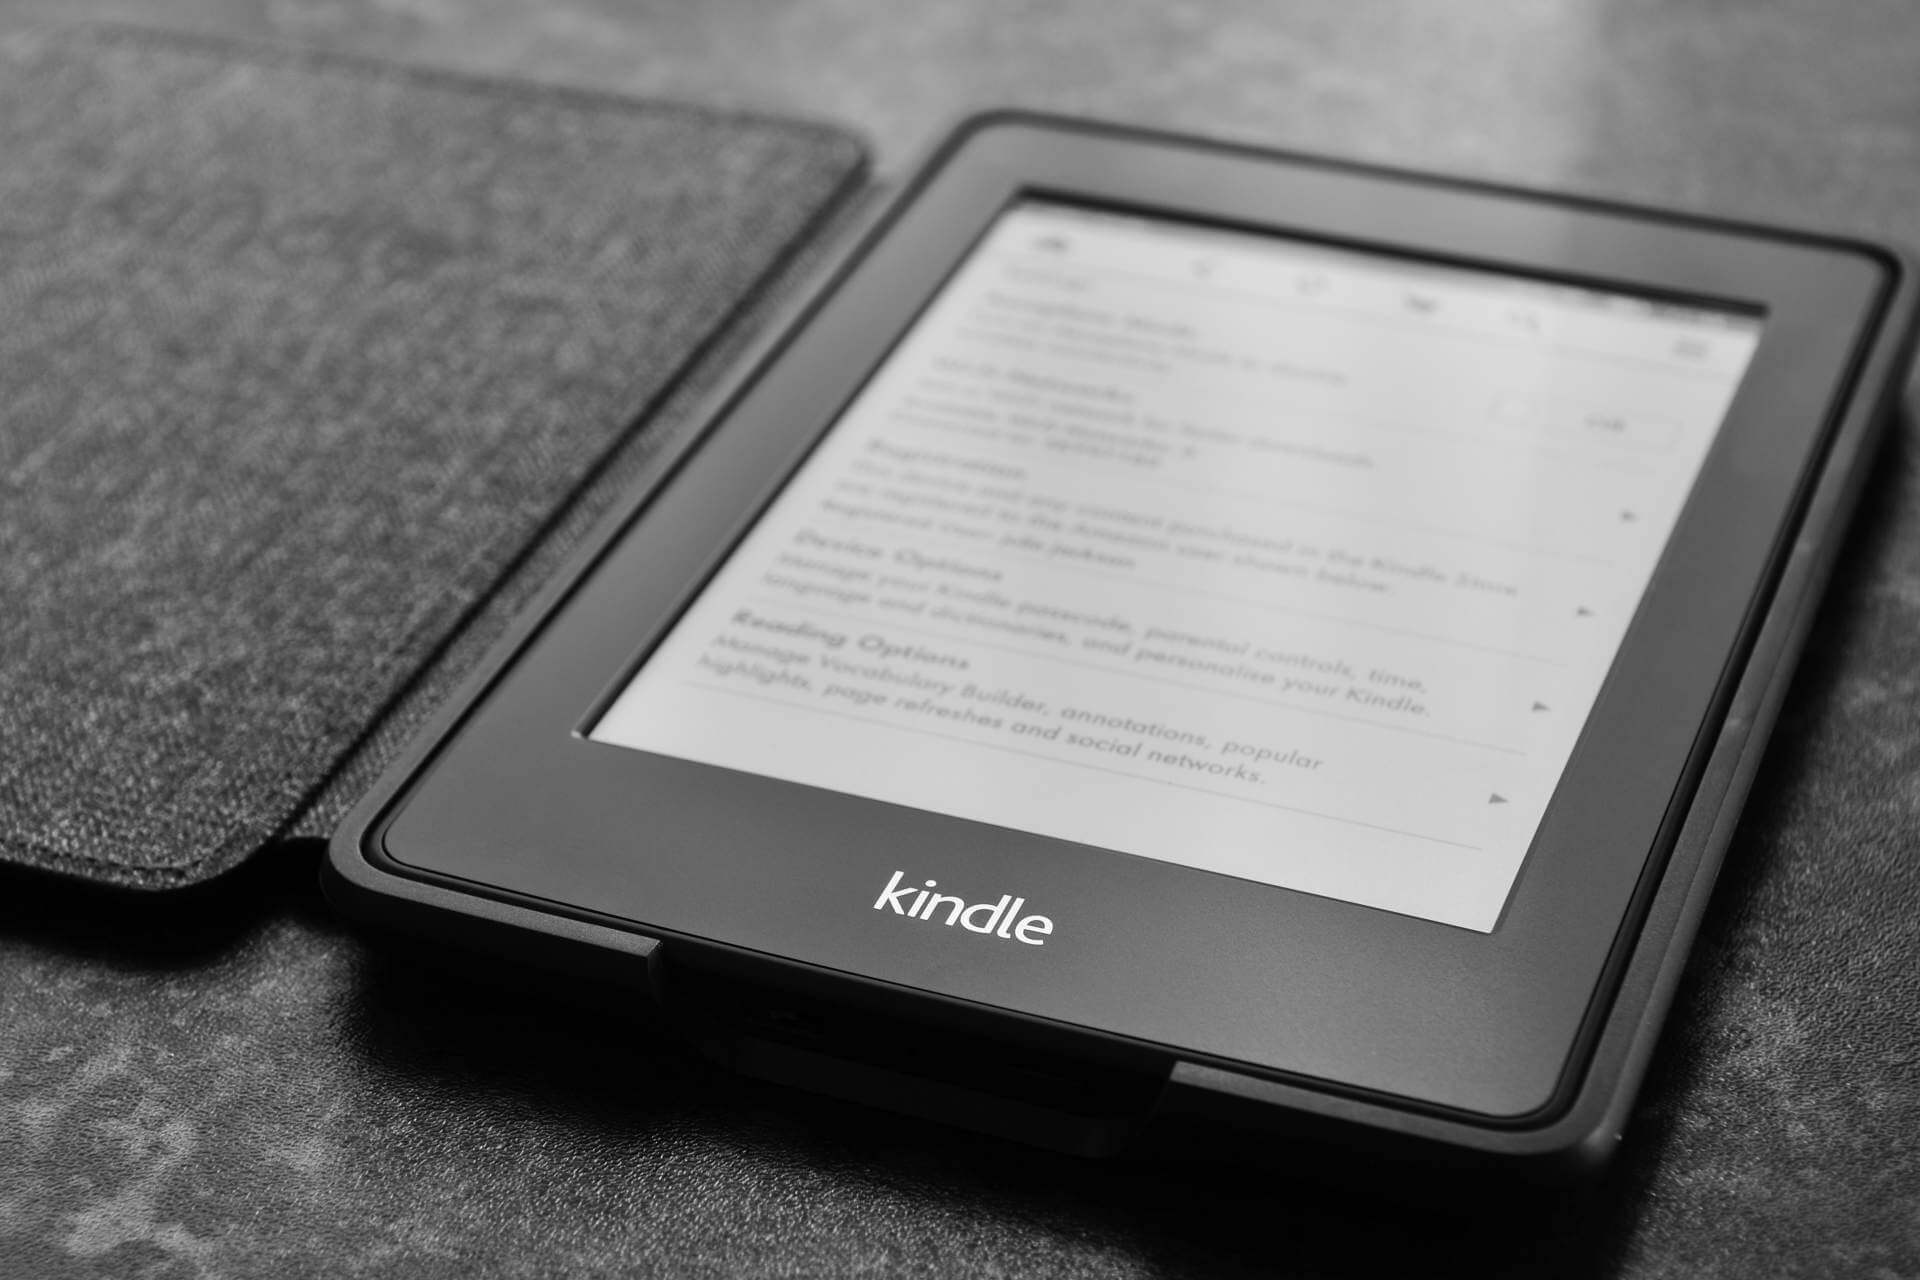 computer cannot find Kindle